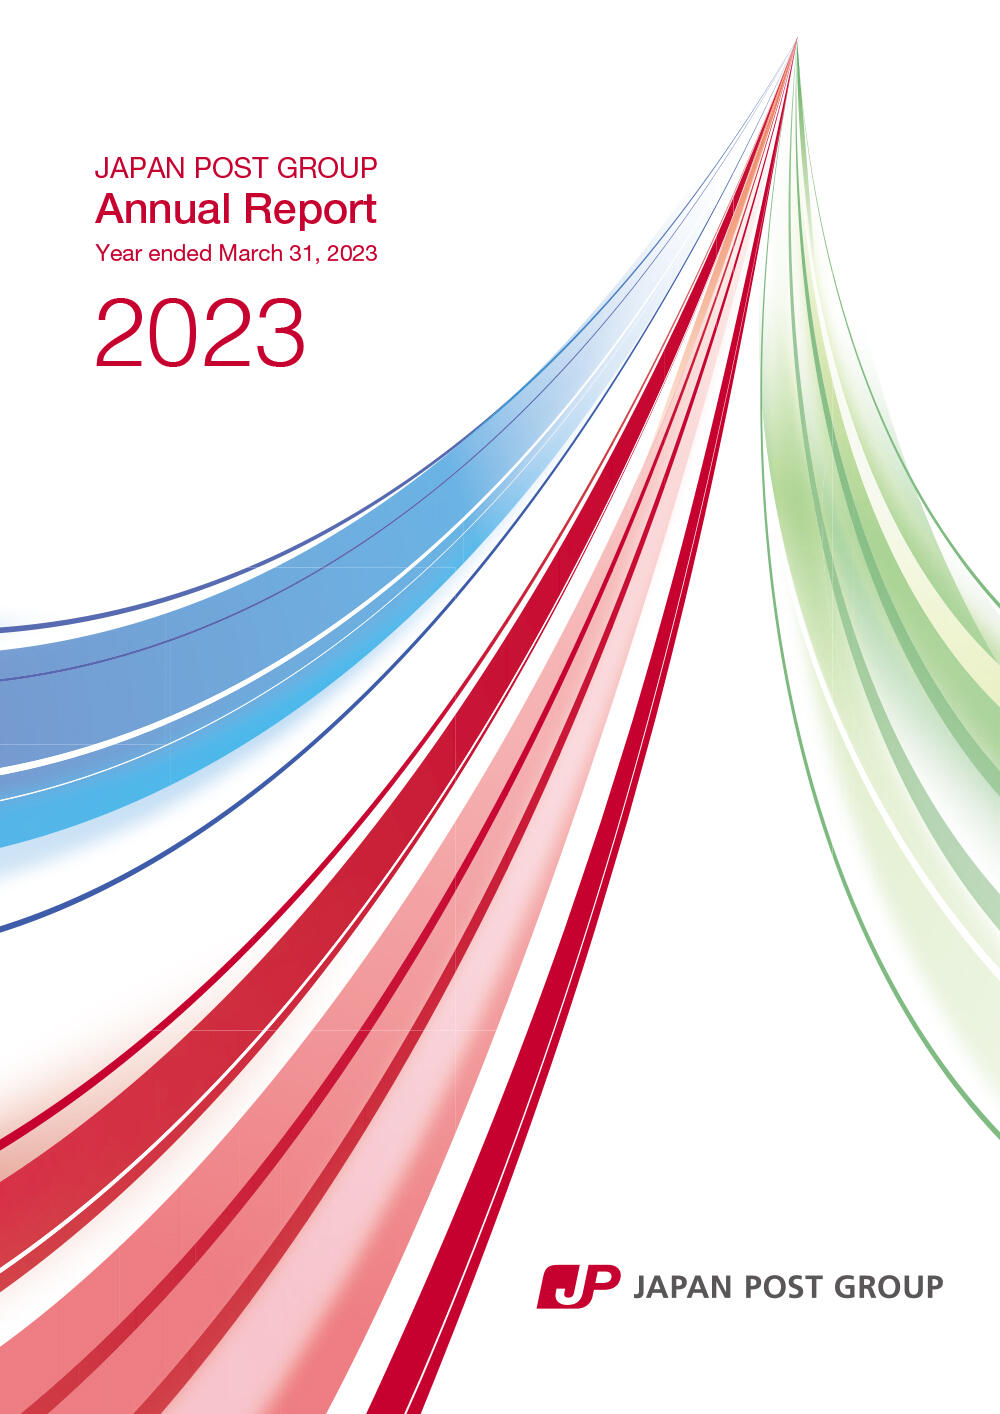 【image】Japan Post Group Annual Report 2023